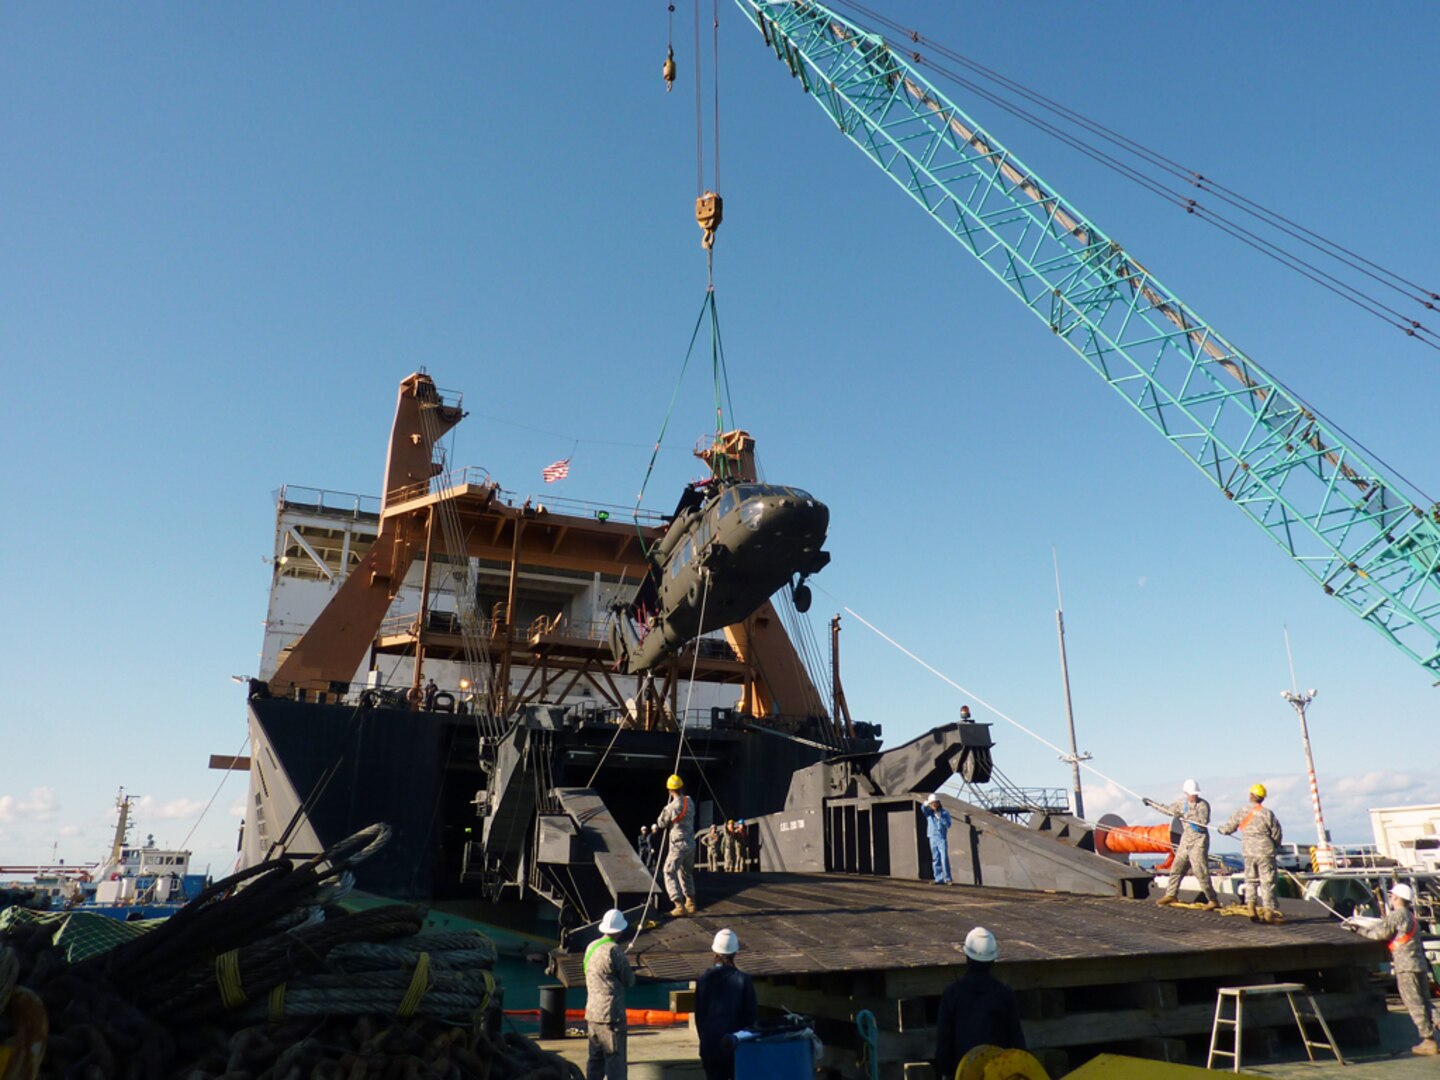 In this file photo, transportation Battalion Members of the 835th Transportation Battalion, Soldiers, and contractors offload a helicopter using a shore crane from the USNS Sgt. Matej Kocak's stern ramp supported by a platform they built on a barge during port operations Feb. 9-12.